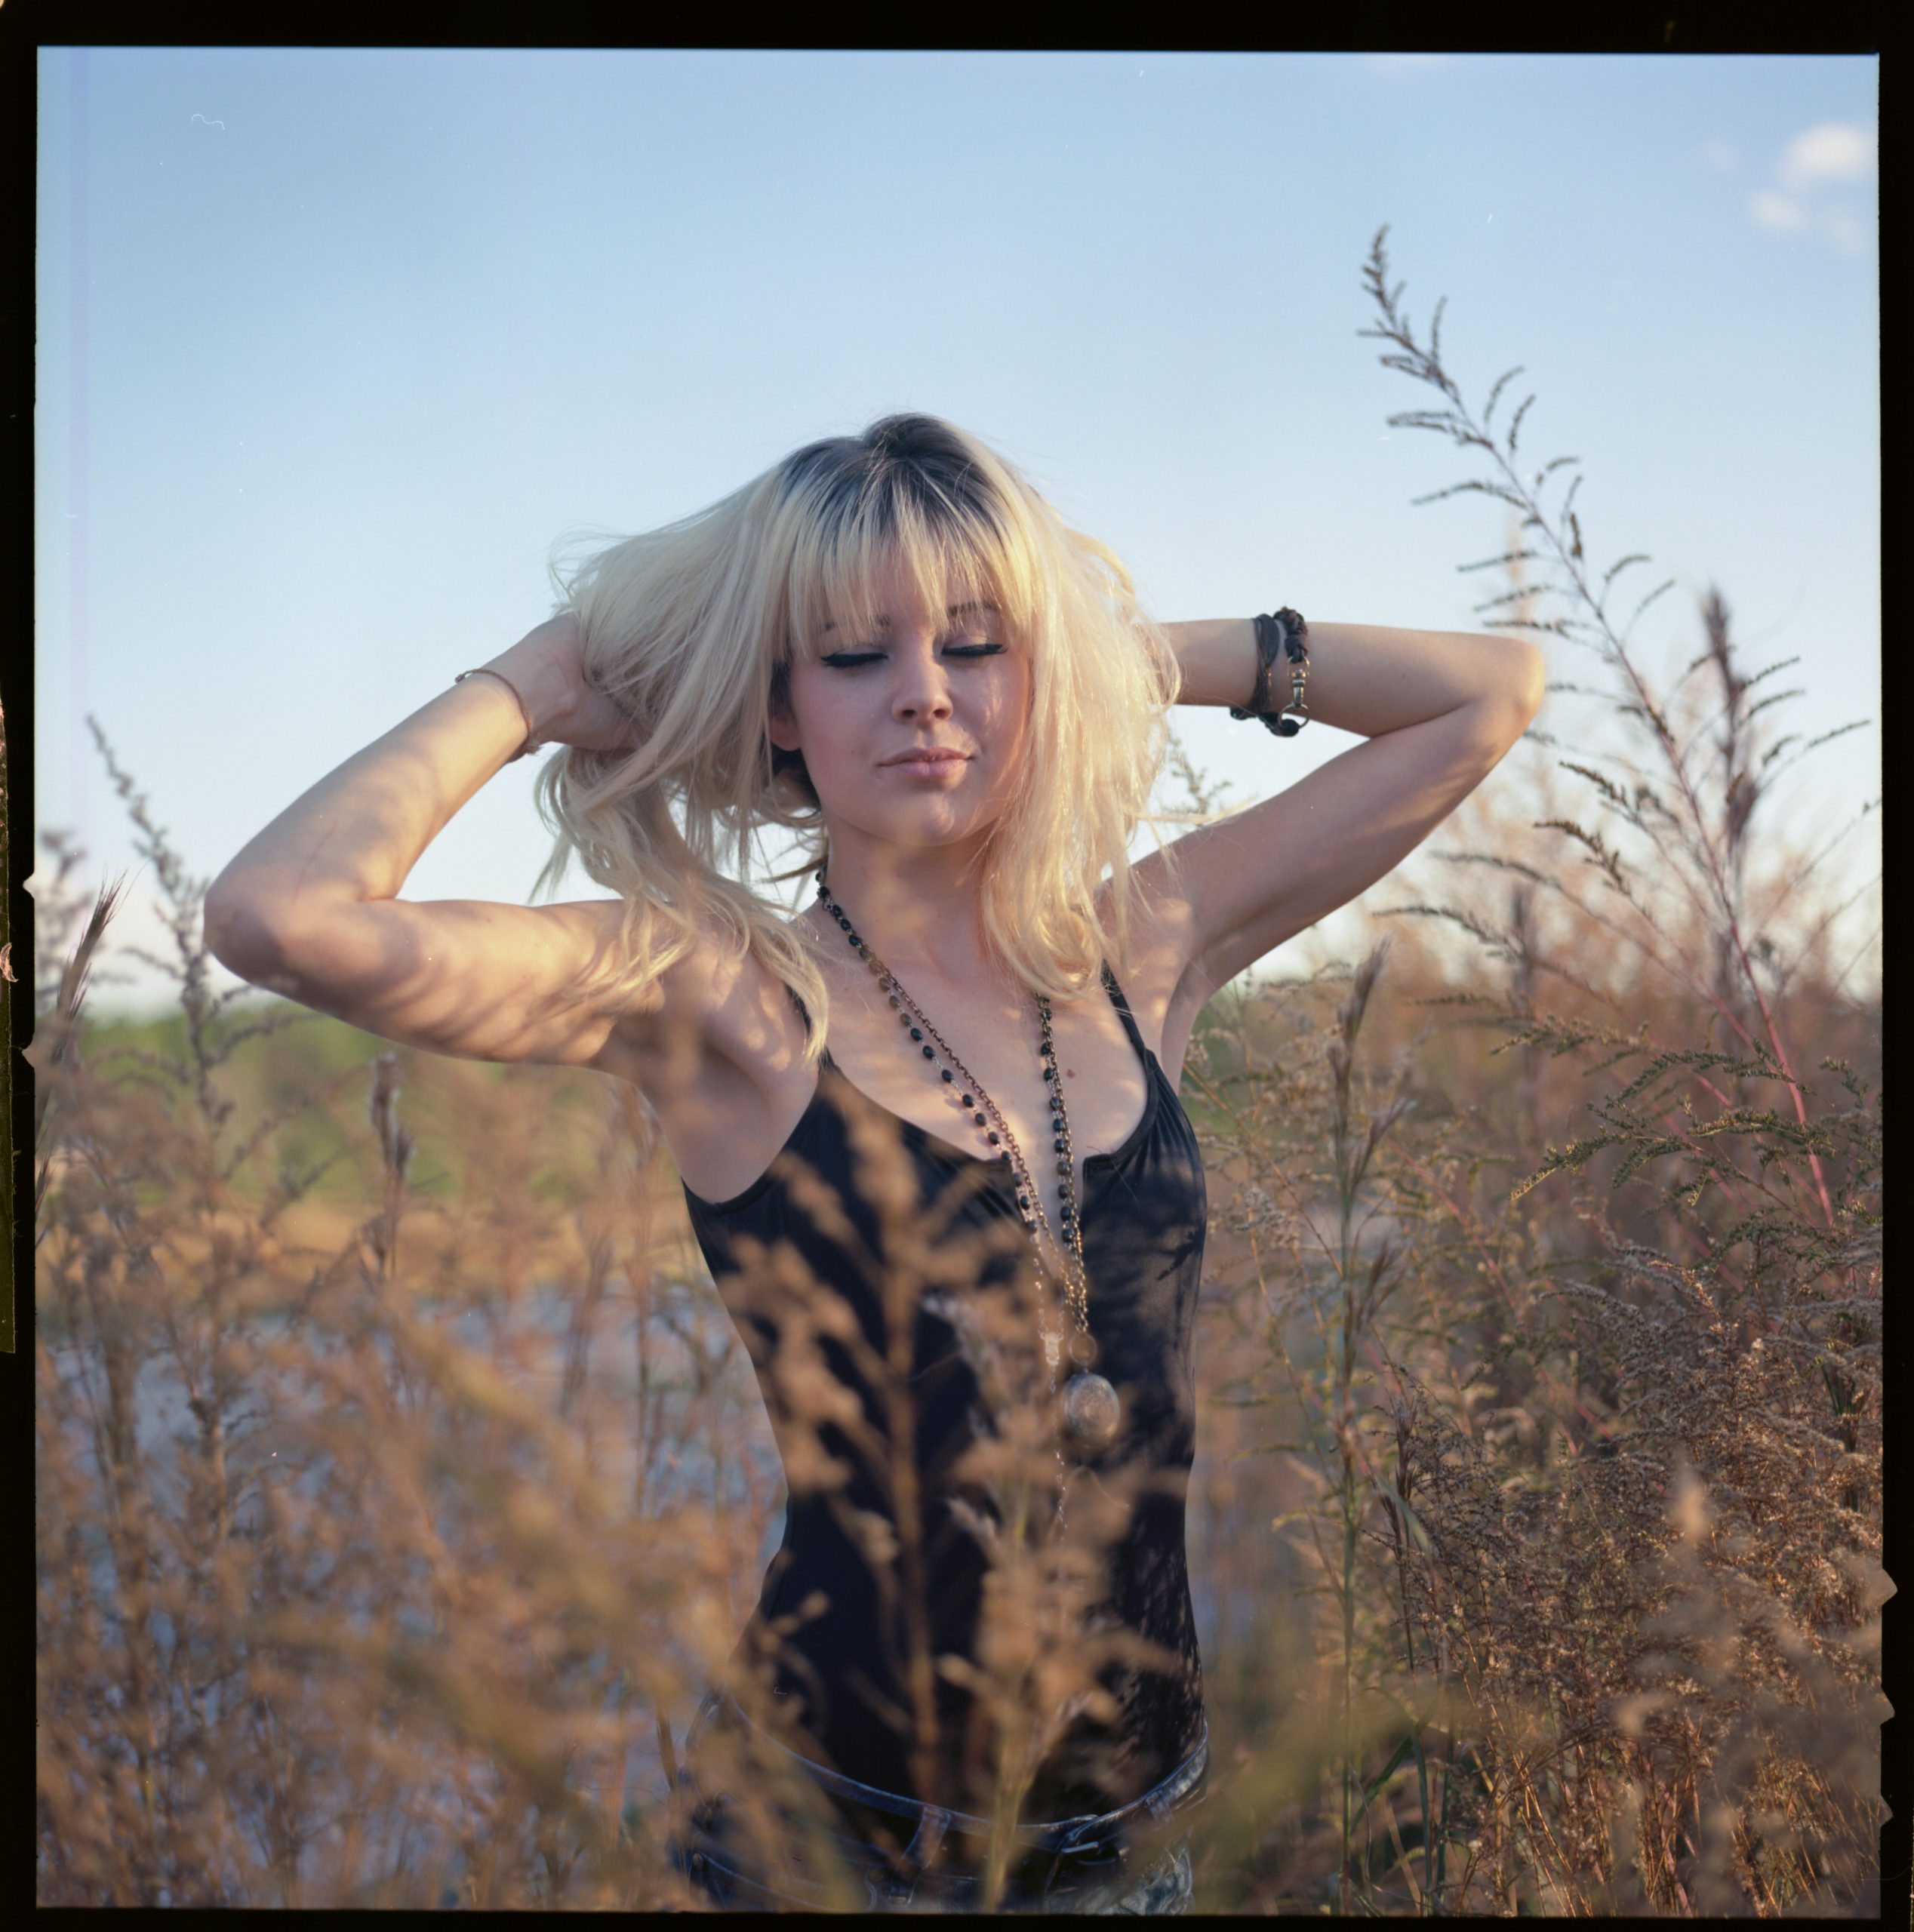 Mandy Murphy and Mojokiss on medium format color negative film shot in a Hasselblad CM500 camera